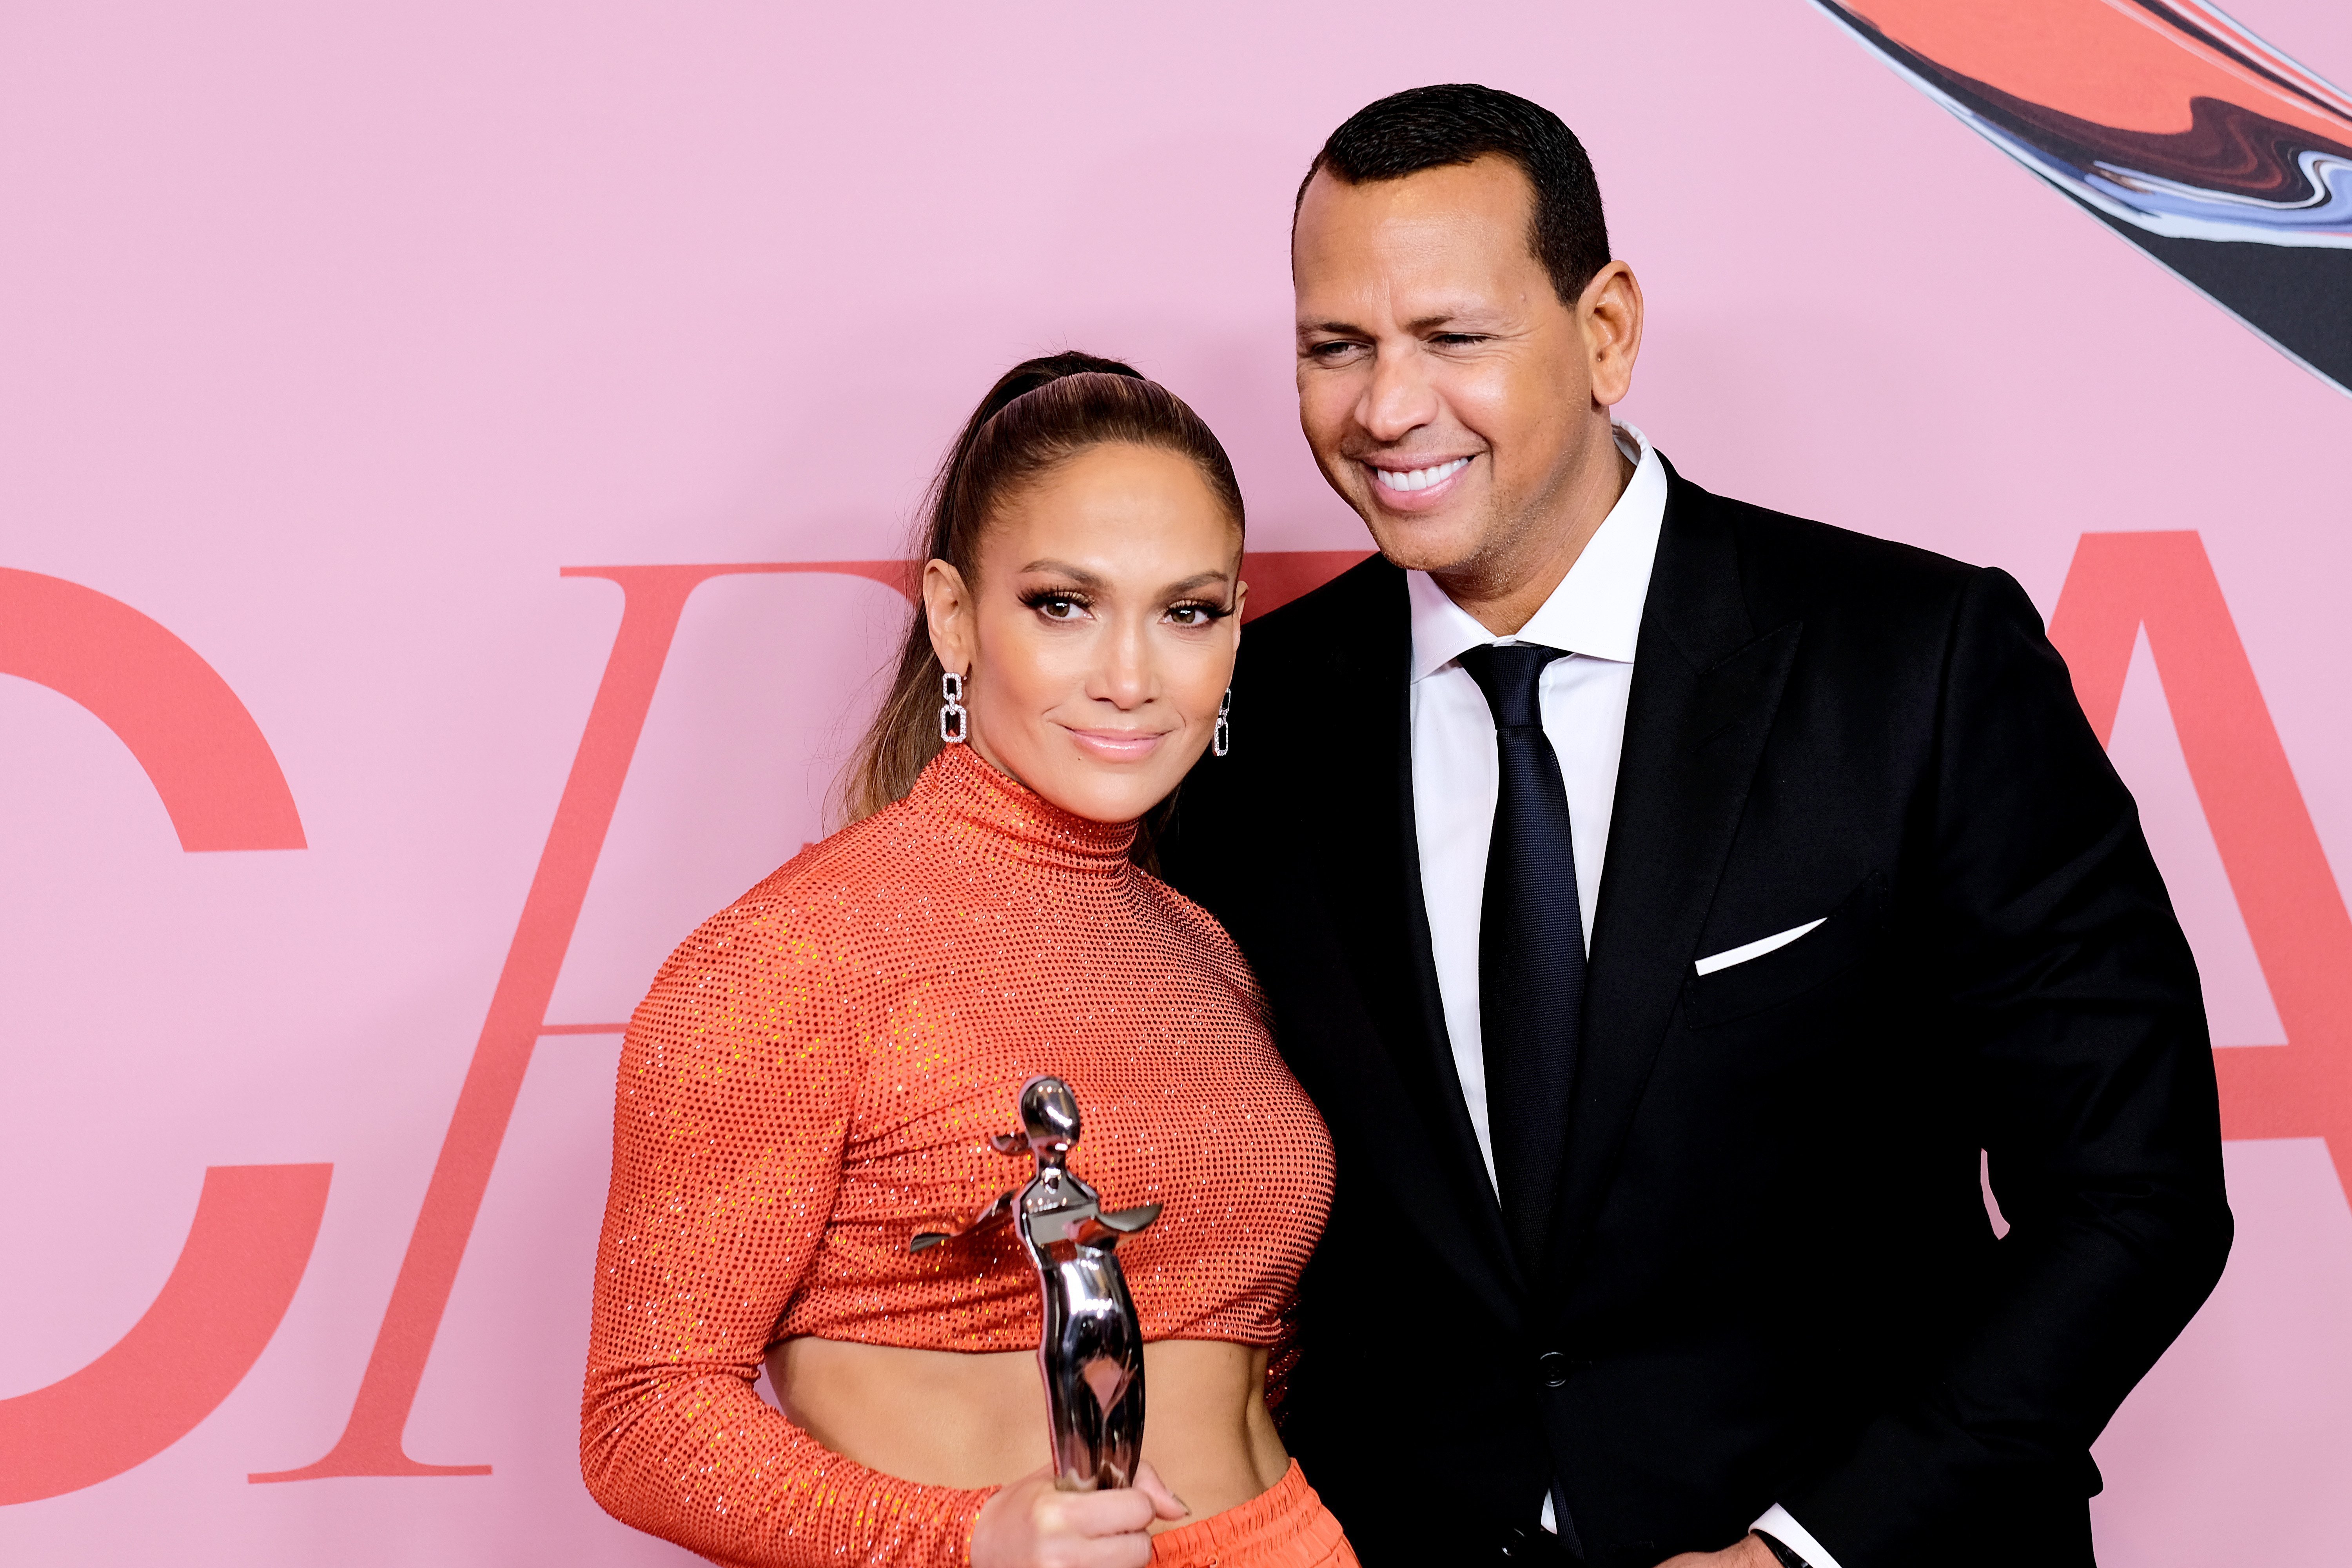 Jennifer Lopez and Alex Rodriguez attend the Fashion Icon Awards in June 2019 | Photo: Getty Images